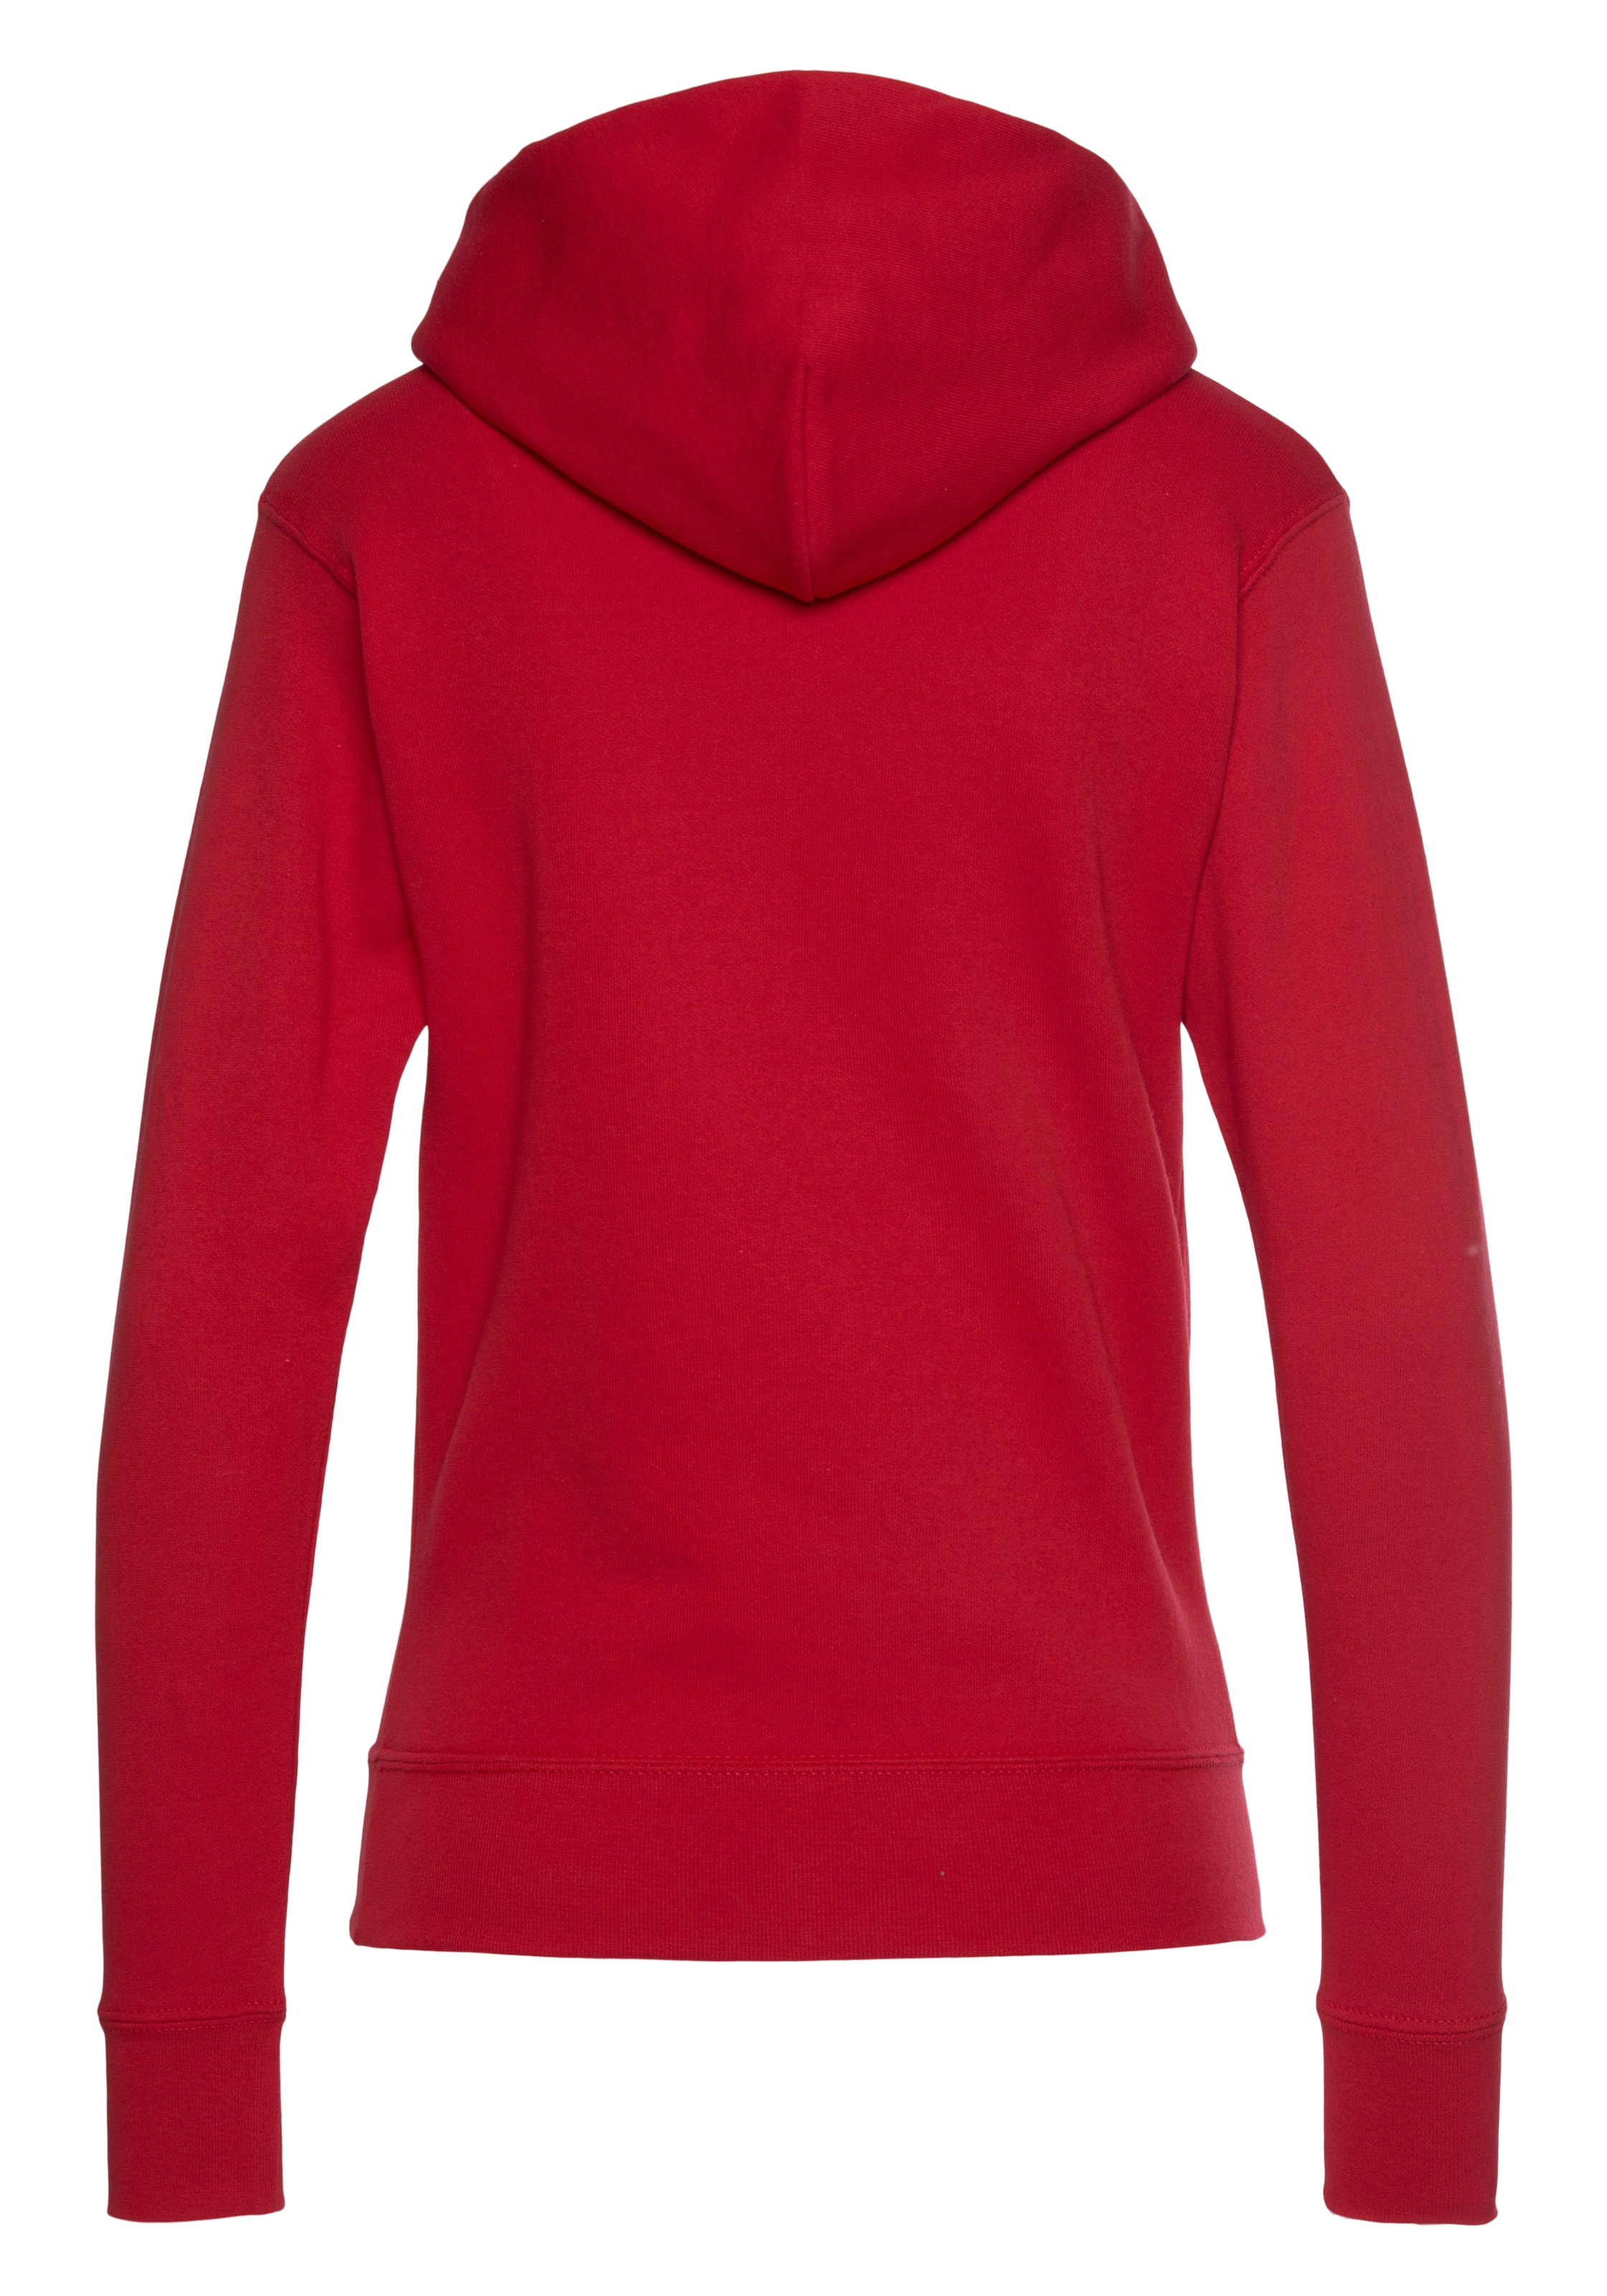 hooded Sweat the Sweatshirt OTTOversand bei Lady-Fit« of »Classic Loom Fruit